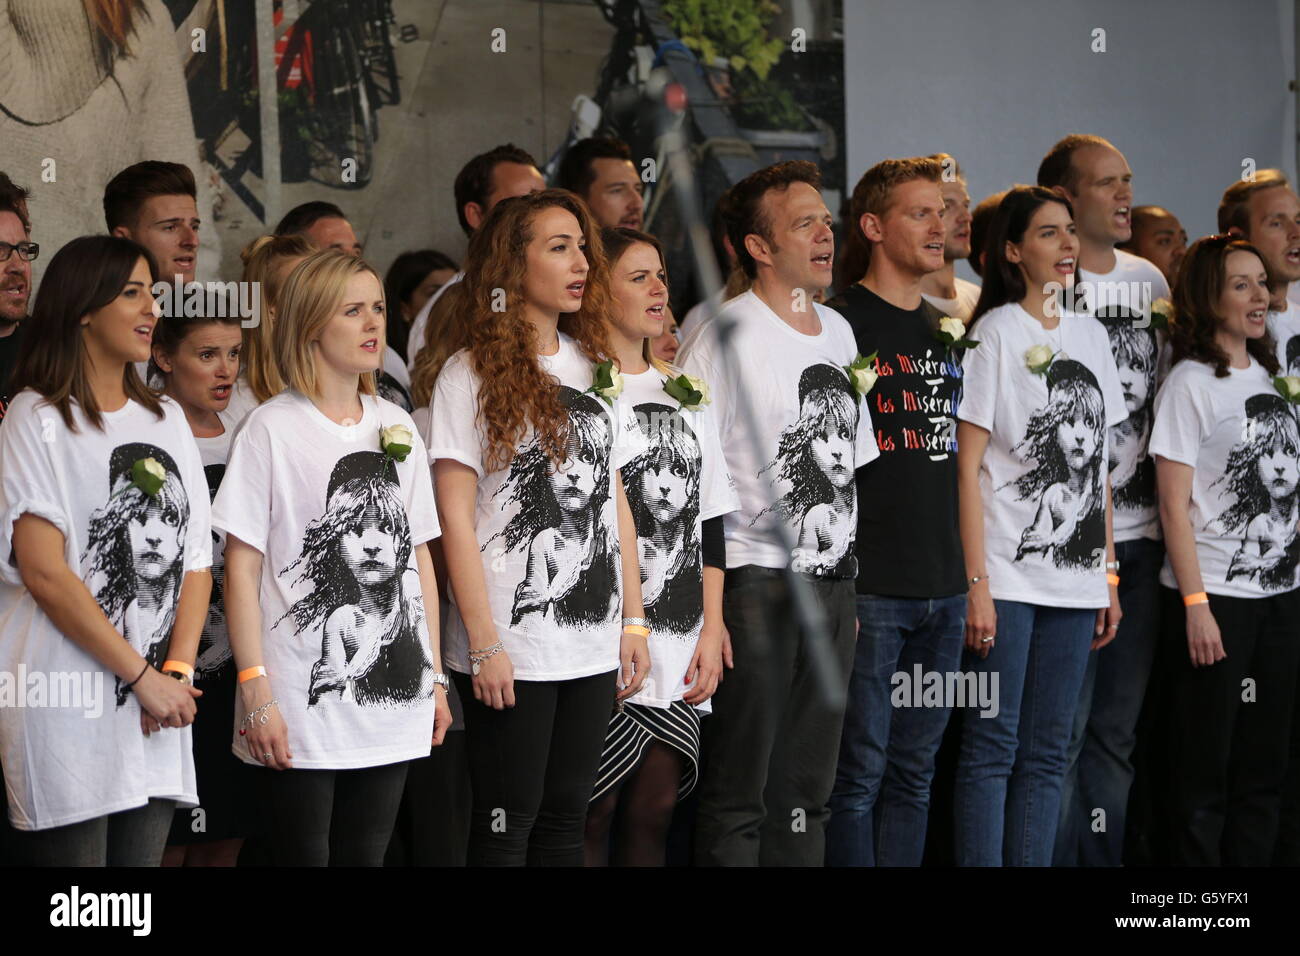 The cast of the West End Play Les Miserables sing a song during the rally in Trafalgar Square, central London to celebrate what would have been the 42nd birthday of the tragic MP Jo Cox. PRESS SSOCIATION Photo. Picture date: Wednesday June 22, 2016. See PA story POLITICS MP. Photo credit should read: Daniel Leal-Olivas/PA Wire Stock Photo